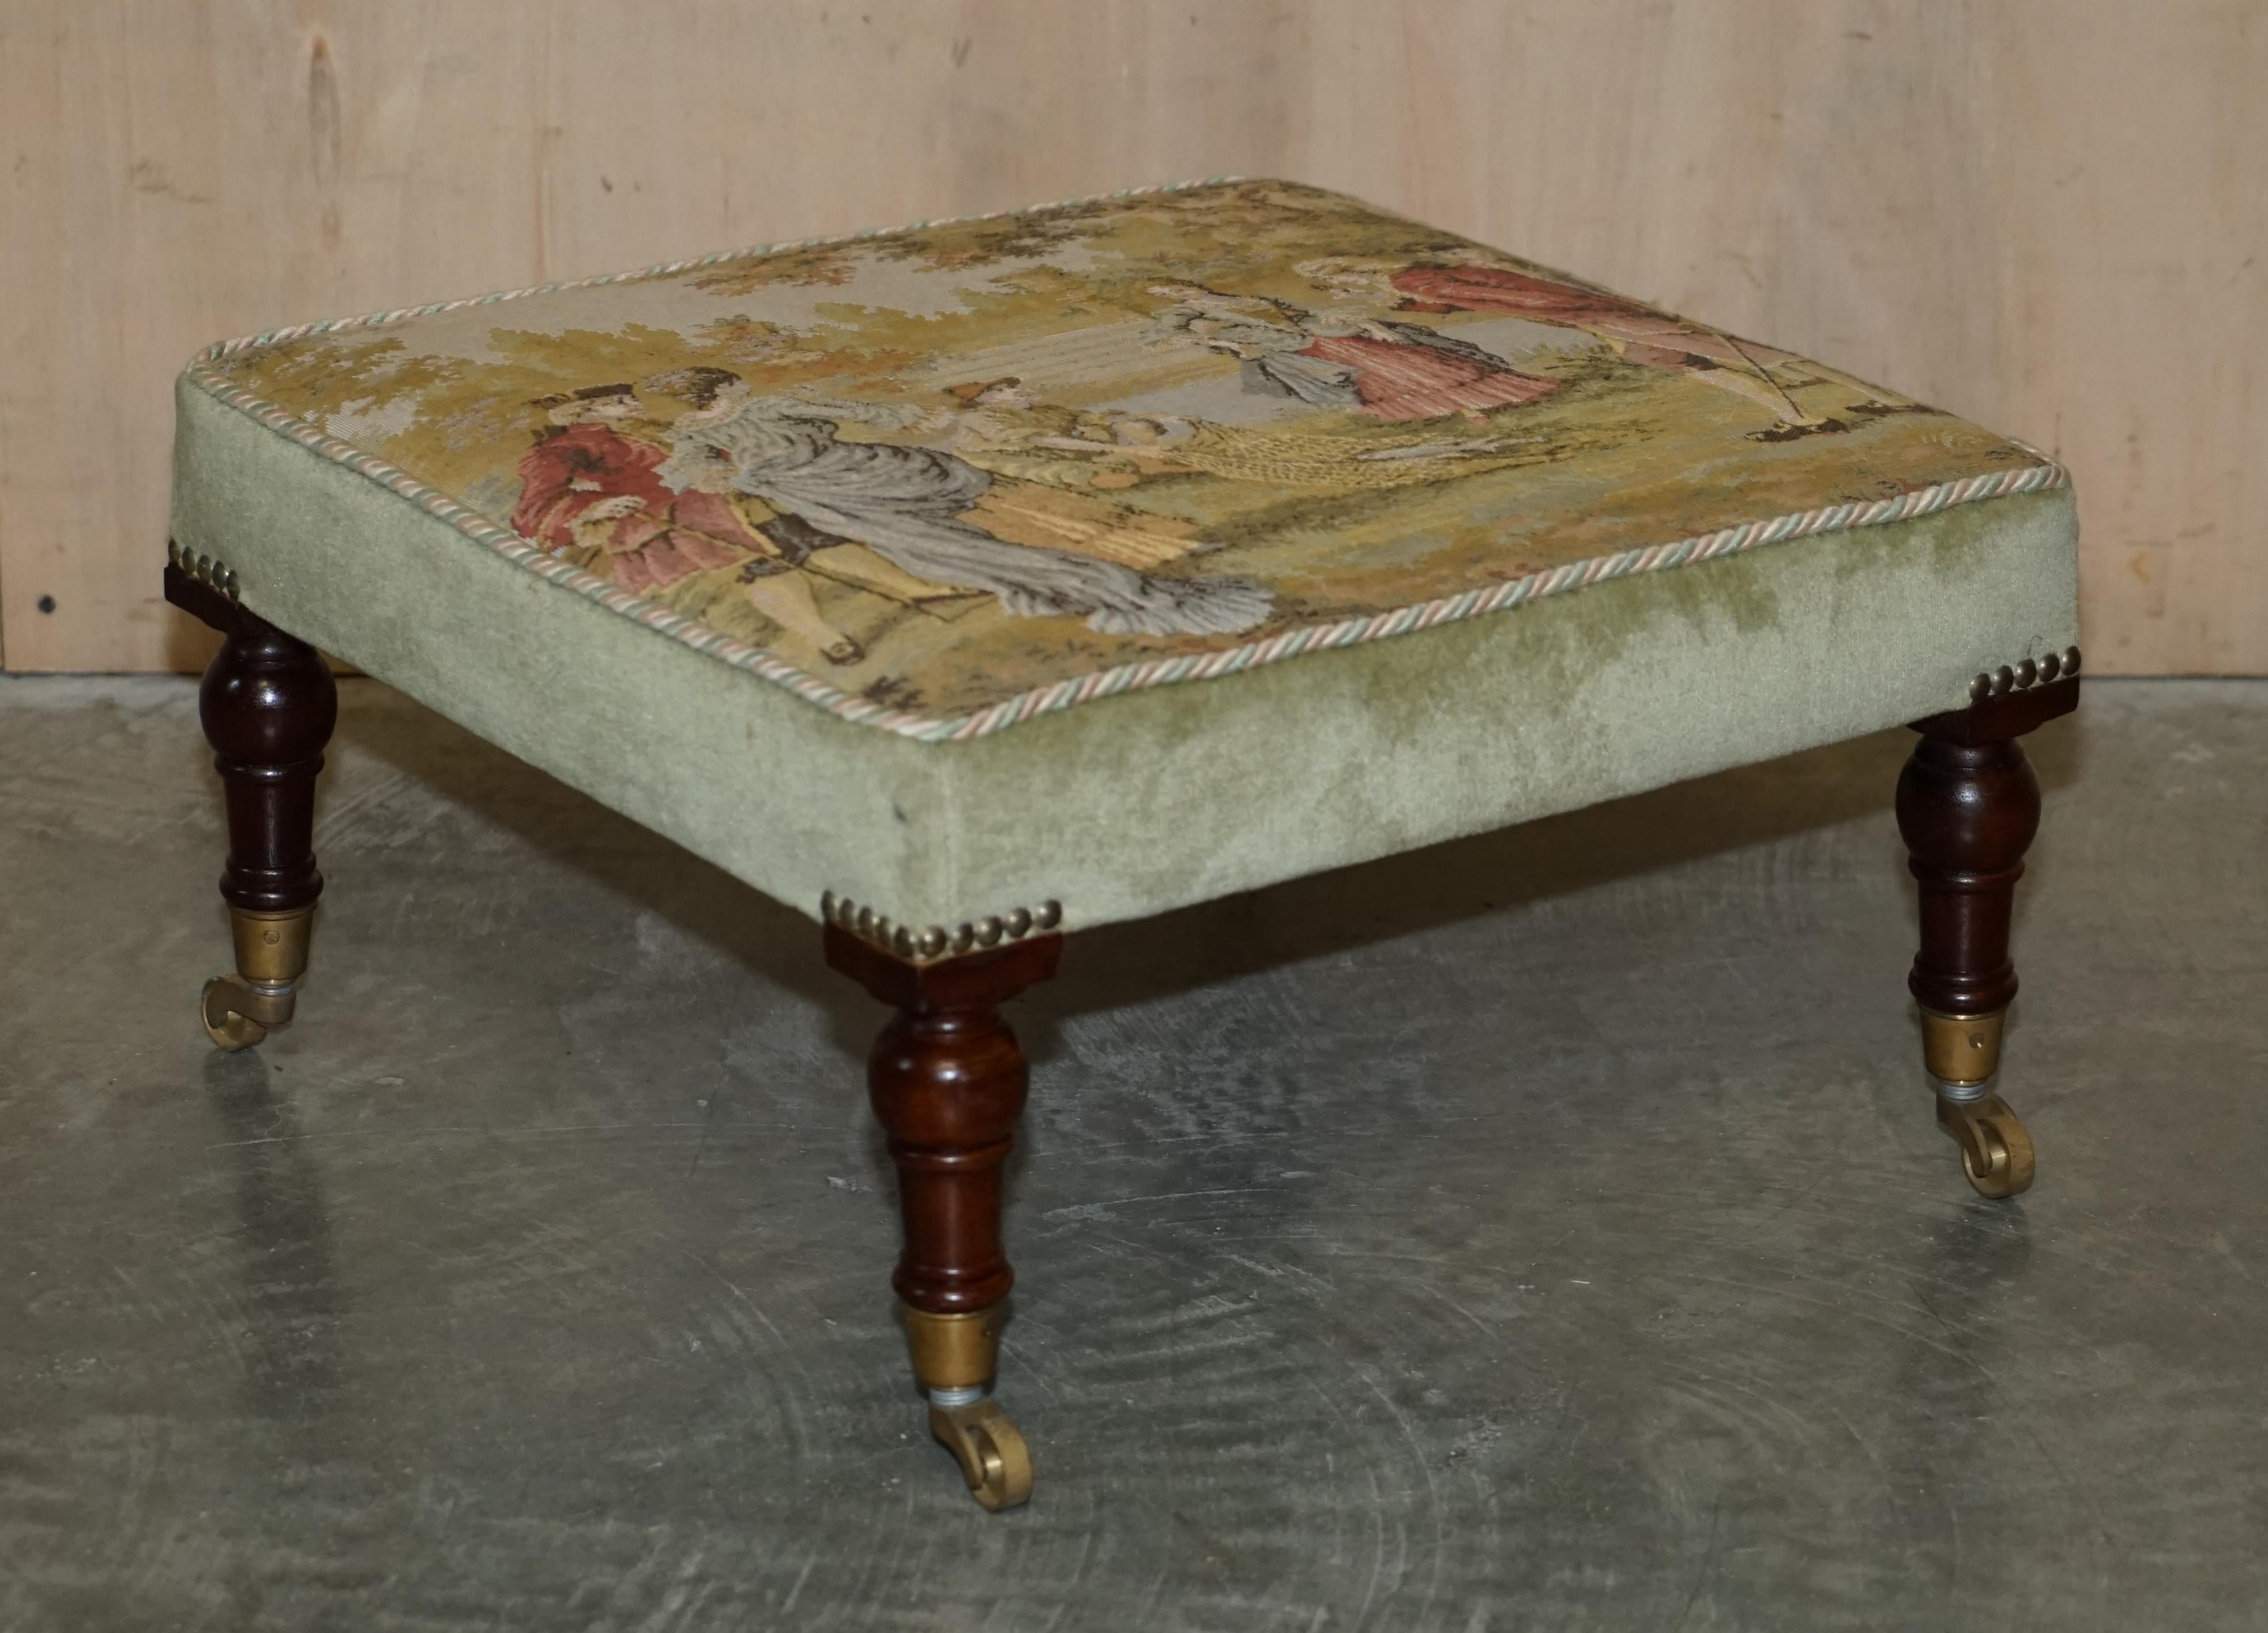 We are delighted to offer for sale this lovely hand Embroidered mahogany framed William & Mary style Victorian footstool which is part of a suite

A very good looking well made and decorative piece. Made in the William & Mary style with wonderful